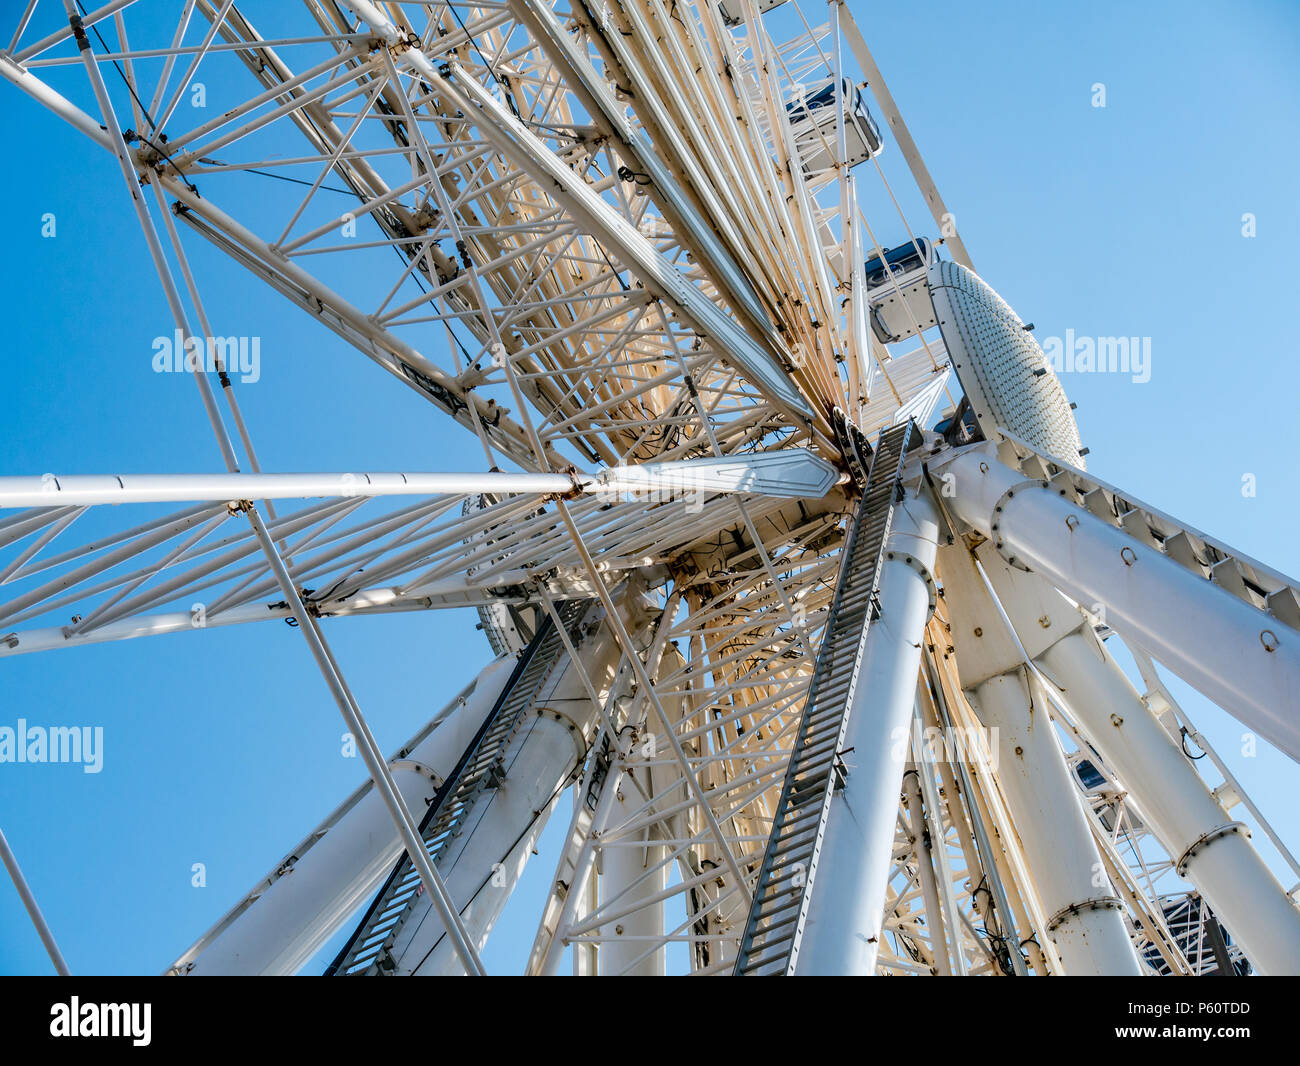 Close up of struts of Wheel of Liverpool ferris wheel, Kheel Wharf, Liverpool, England, UK with blue sky creating contrast Stock Photo